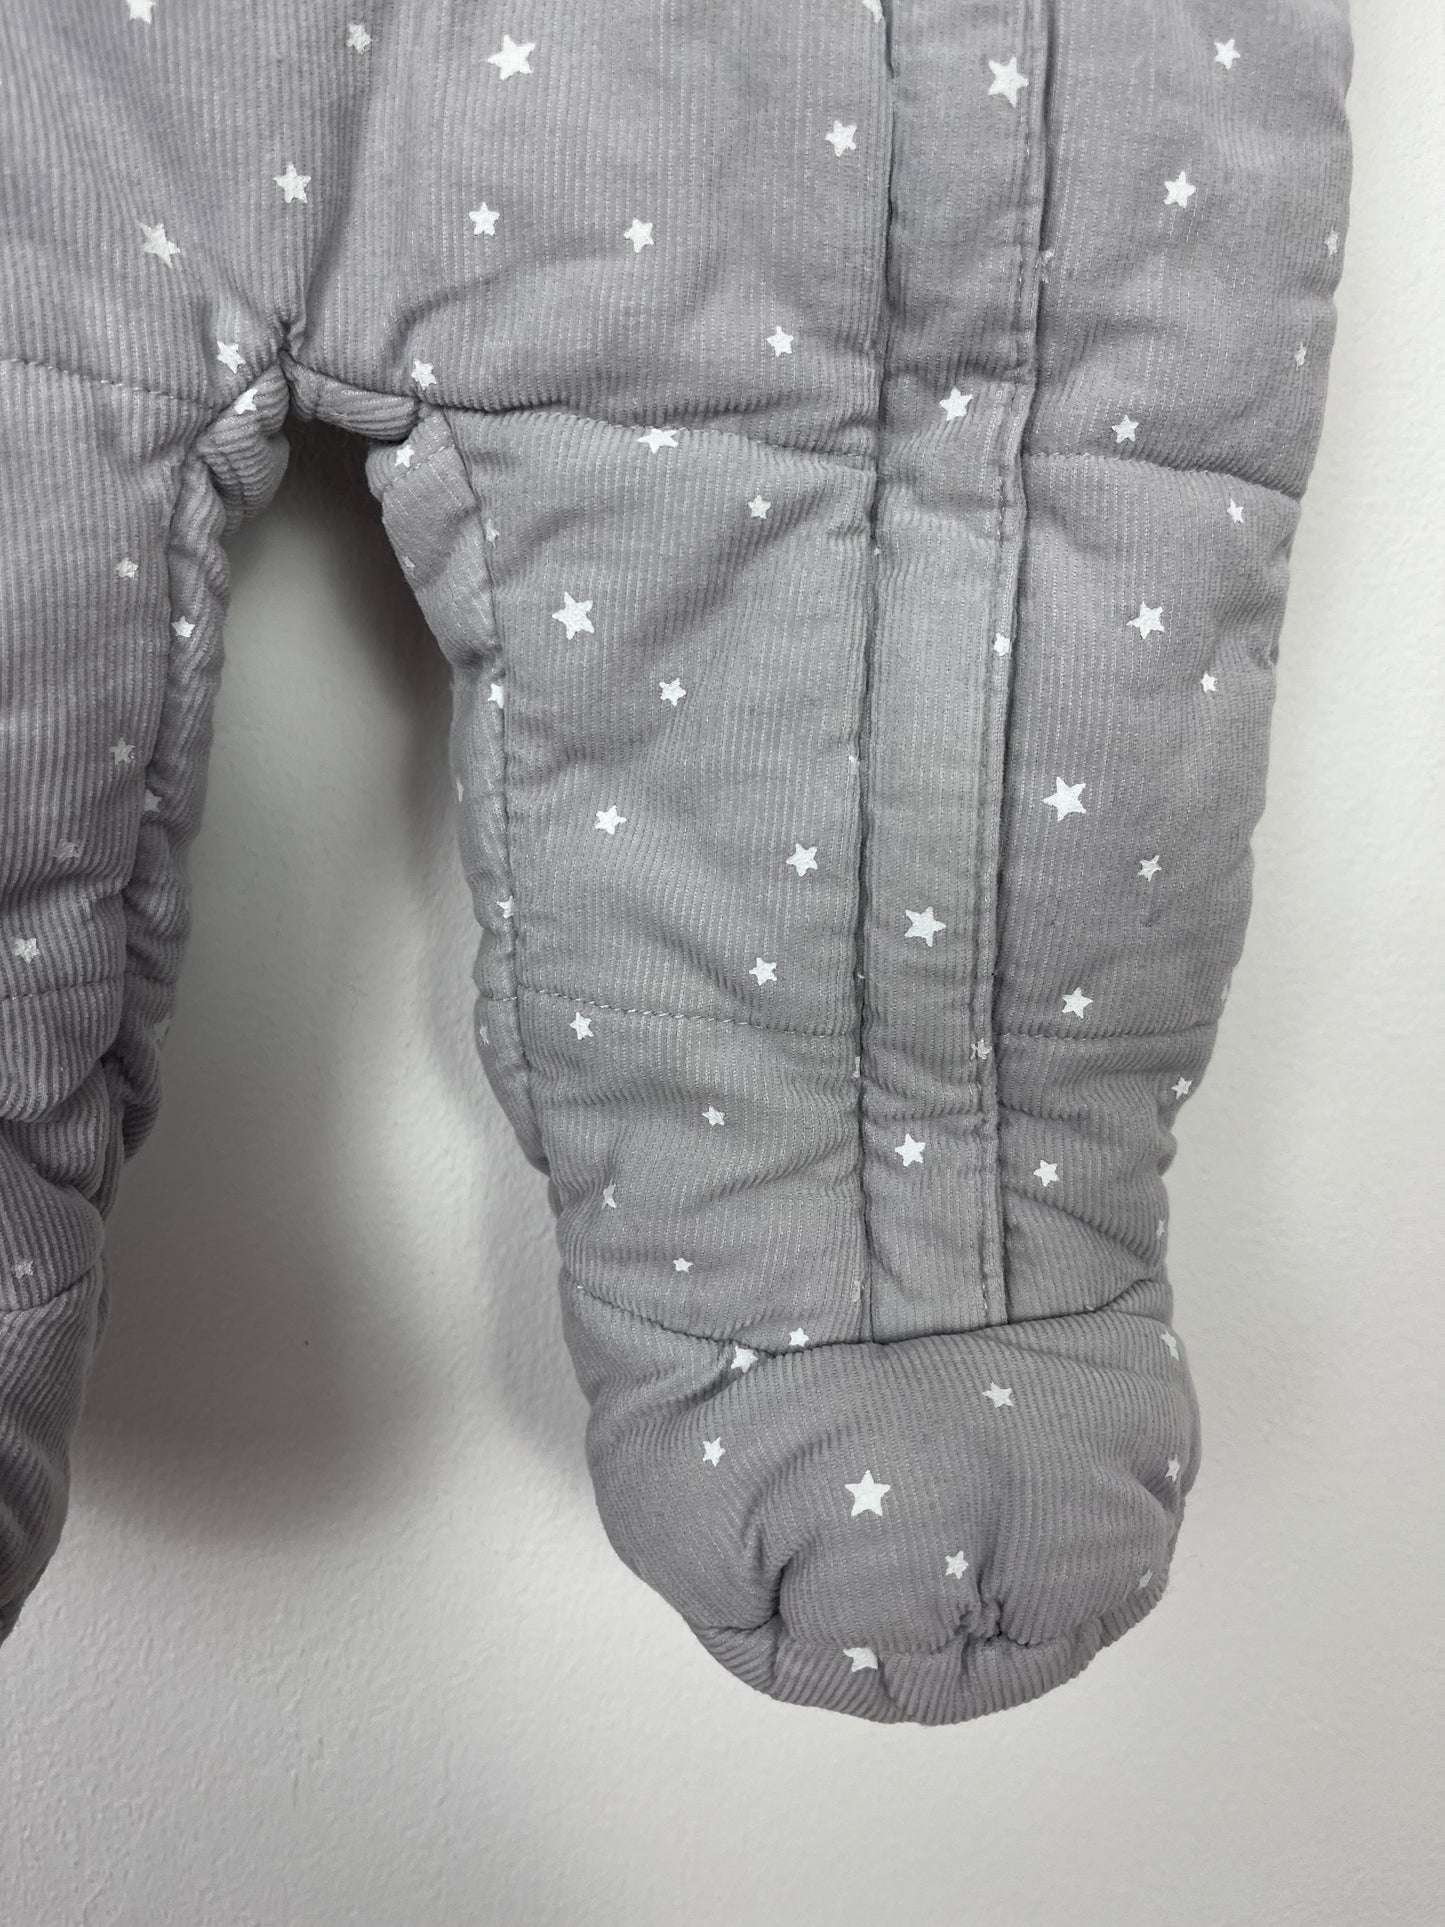 M&S Up To 1 Month-Pramsuits-Second Snuggle Preloved